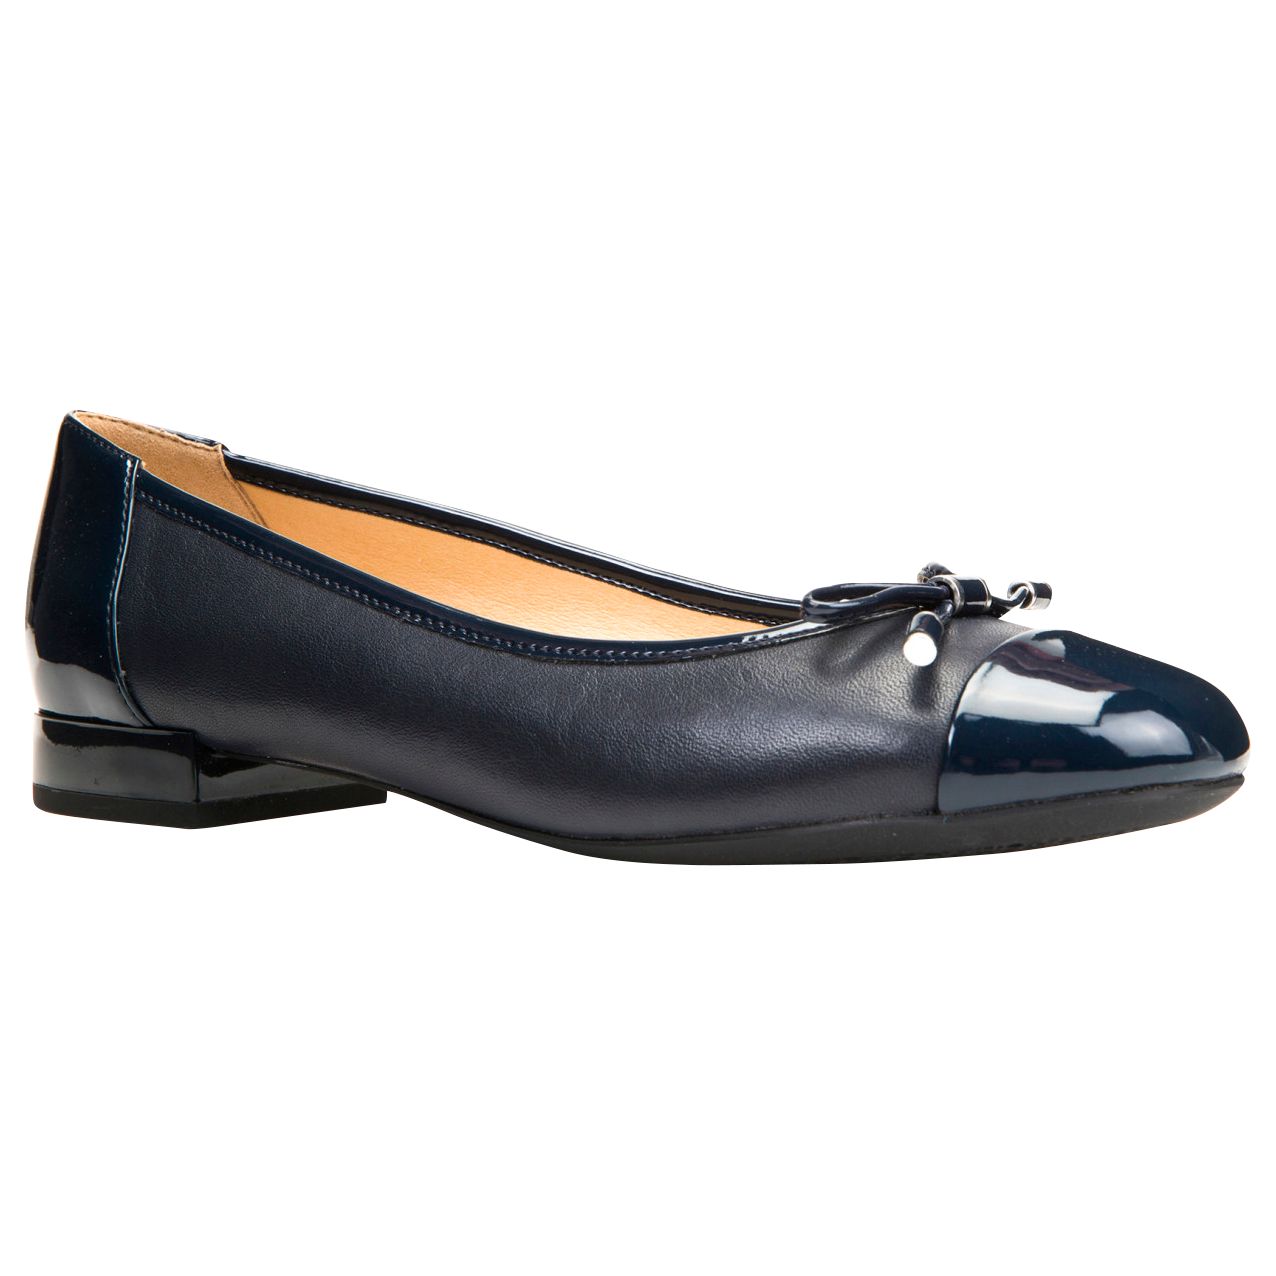 Geox Women's Wistrey Breathable Ballet Pumps, Navy Leather, 7.5